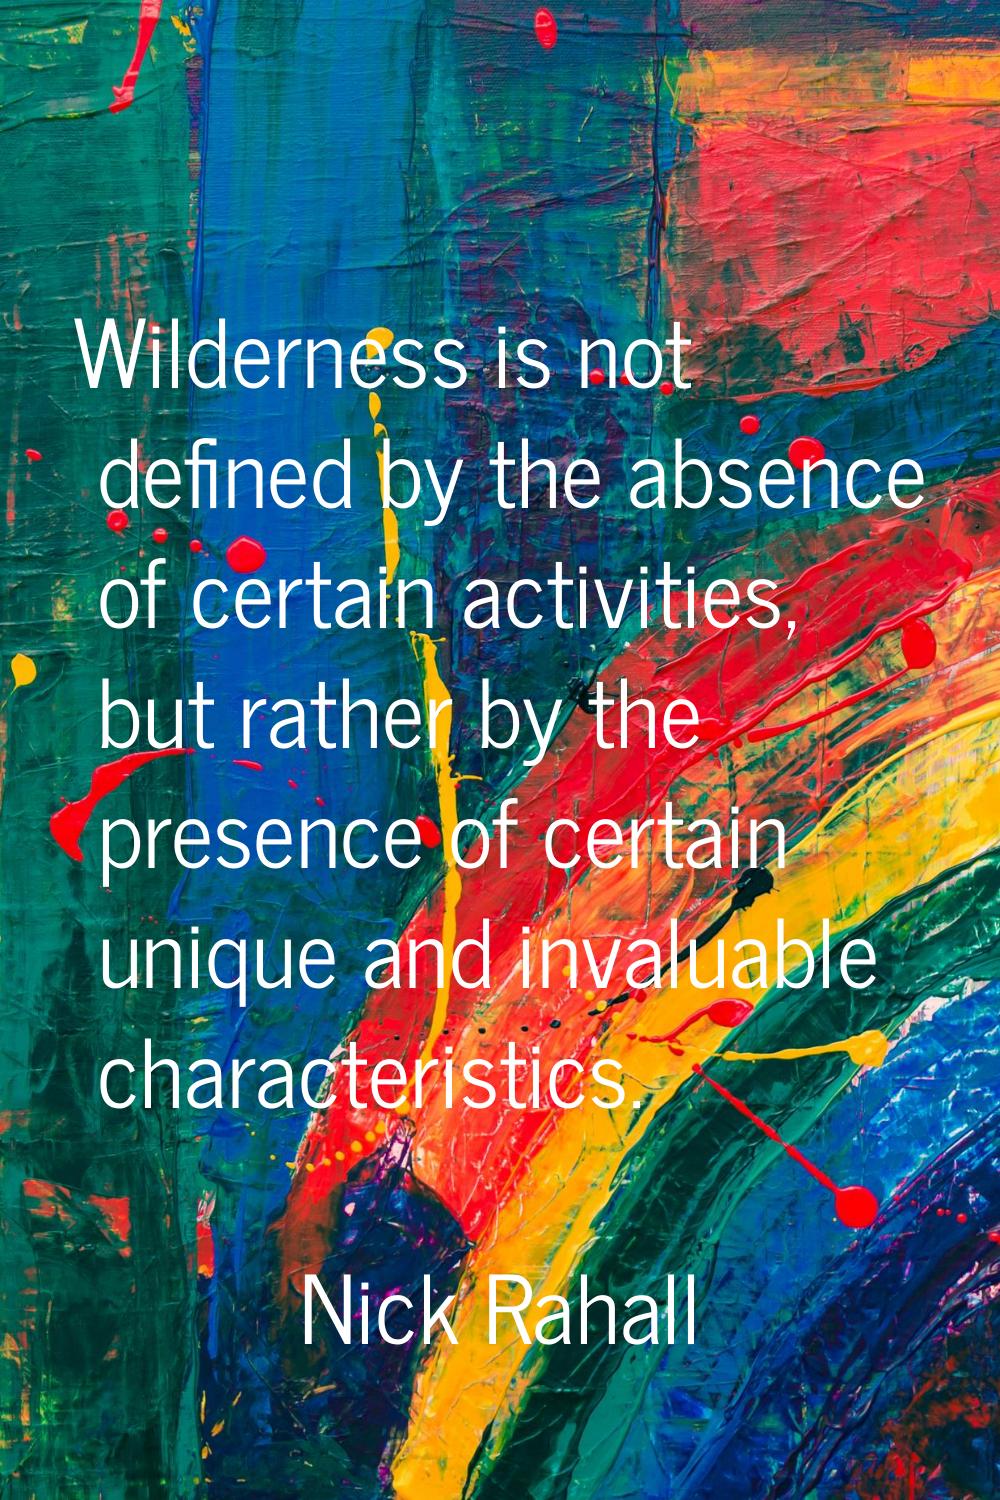 Wilderness is not defined by the absence of certain activities, but rather by the presence of certa